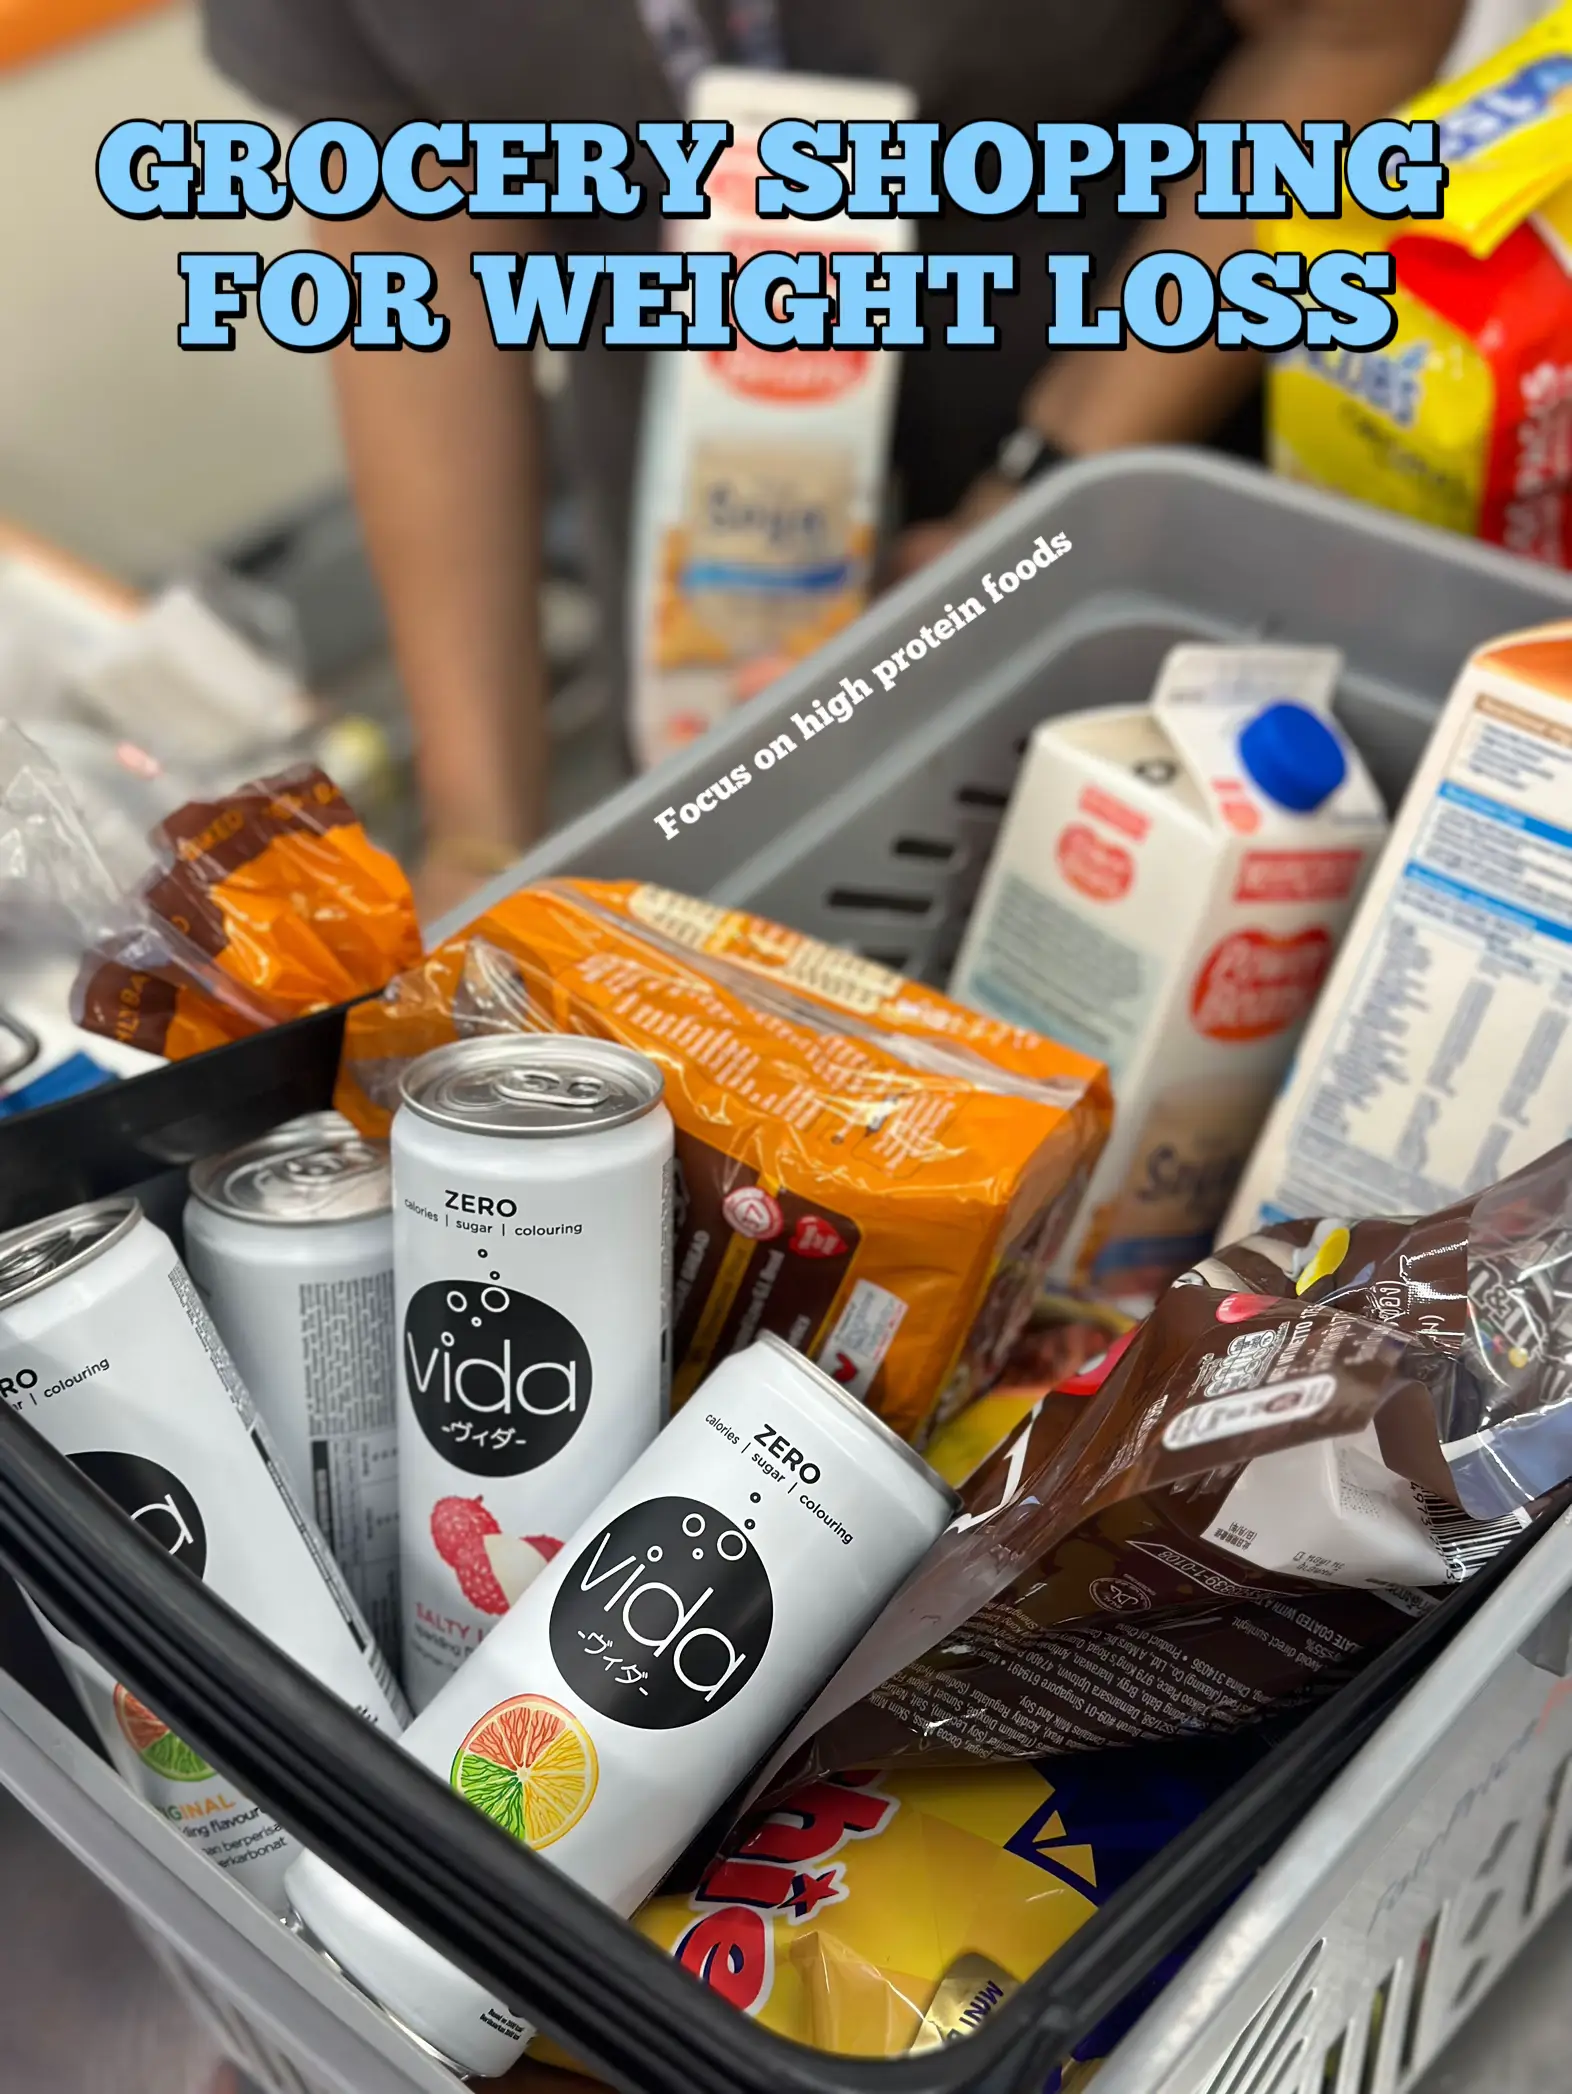 GROCERY SHOPPING FOR WEIGHT LOSS's images(0)